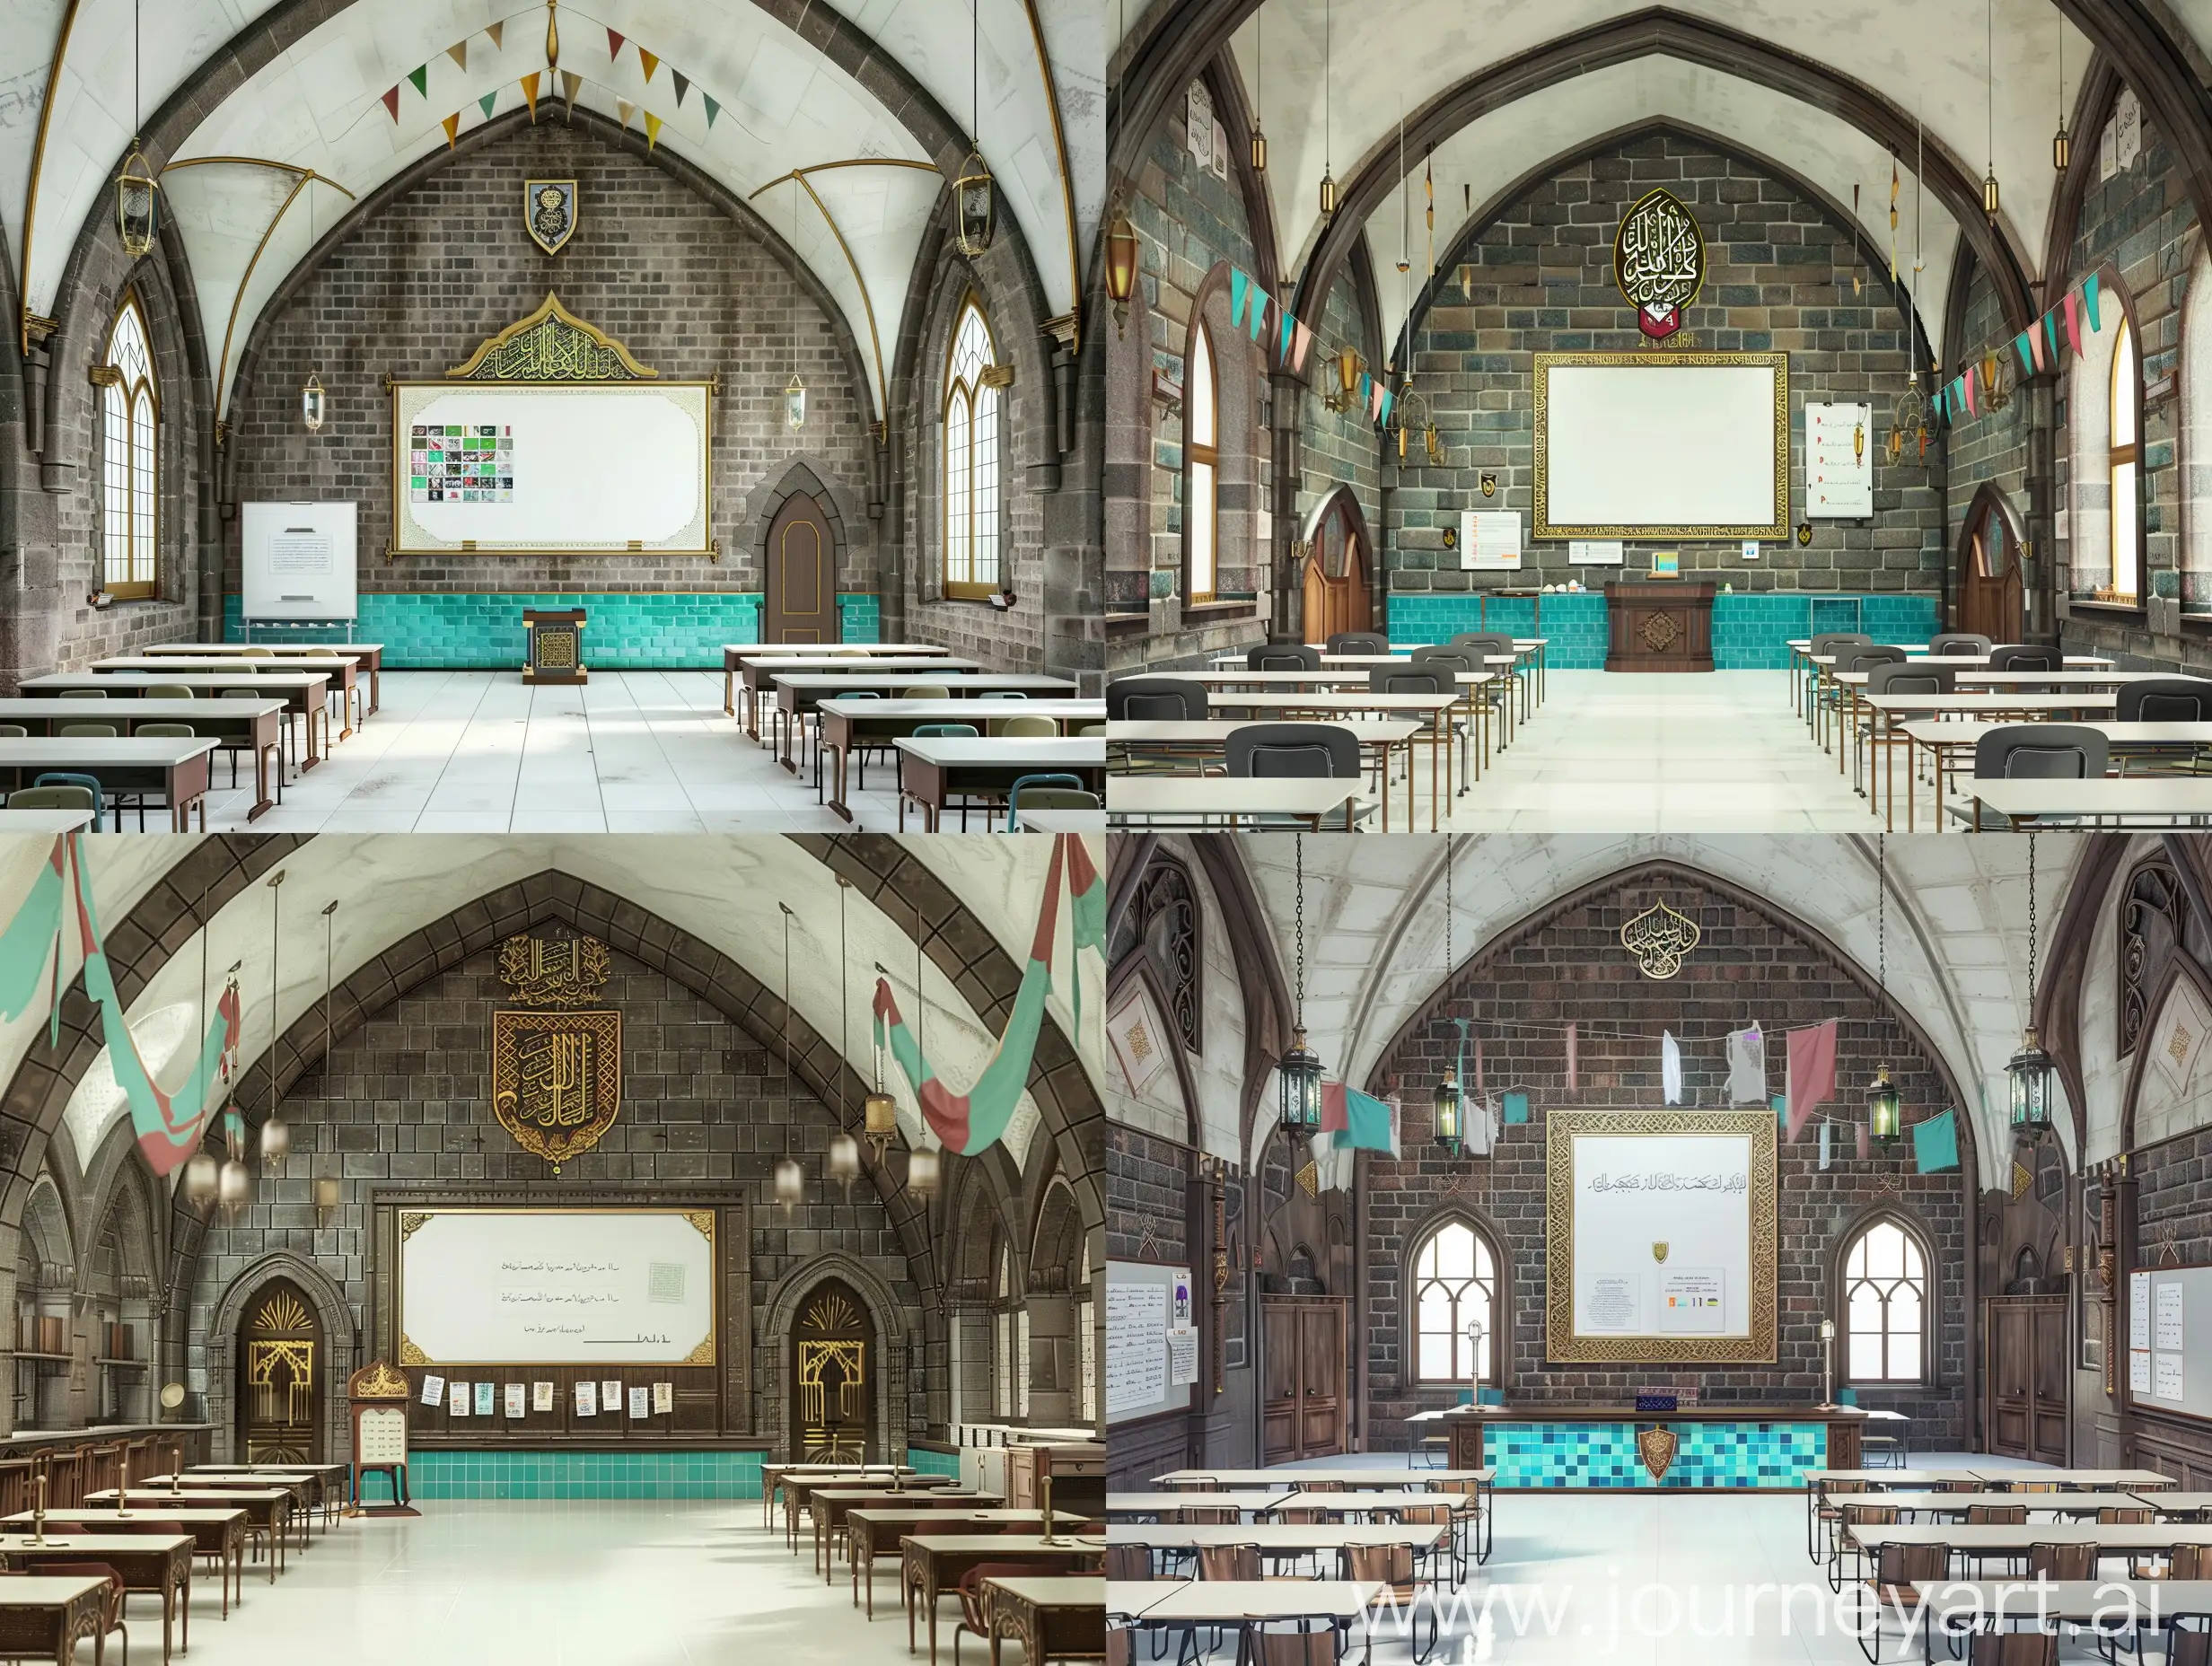 islamic arch vaulted classroom, plain interior made of darkbrown stone bricks, a whiteboard enclosed within golden arabesque frame is hanging on the front, noticeboard having pinned posters is on inwards going side wall, many desks with chairs, white floor, turquoise tiled lower wall, heraldic crest on top, long flag banners hanging from ceiling edges, islamic hanging lamps, minbar pulpit, arched side windows, two doors on front corners --sref https://cdn.discordapp.com/attachments/1213041174428782623/1242354047328190524/images_-_2024-05-21T112058.741.jpg?ex=664d87de&is=664c365e&hm=6af818a0e3f59d253909febba320e7fce1983999fba4d21f86213fd2f3f2ea98&